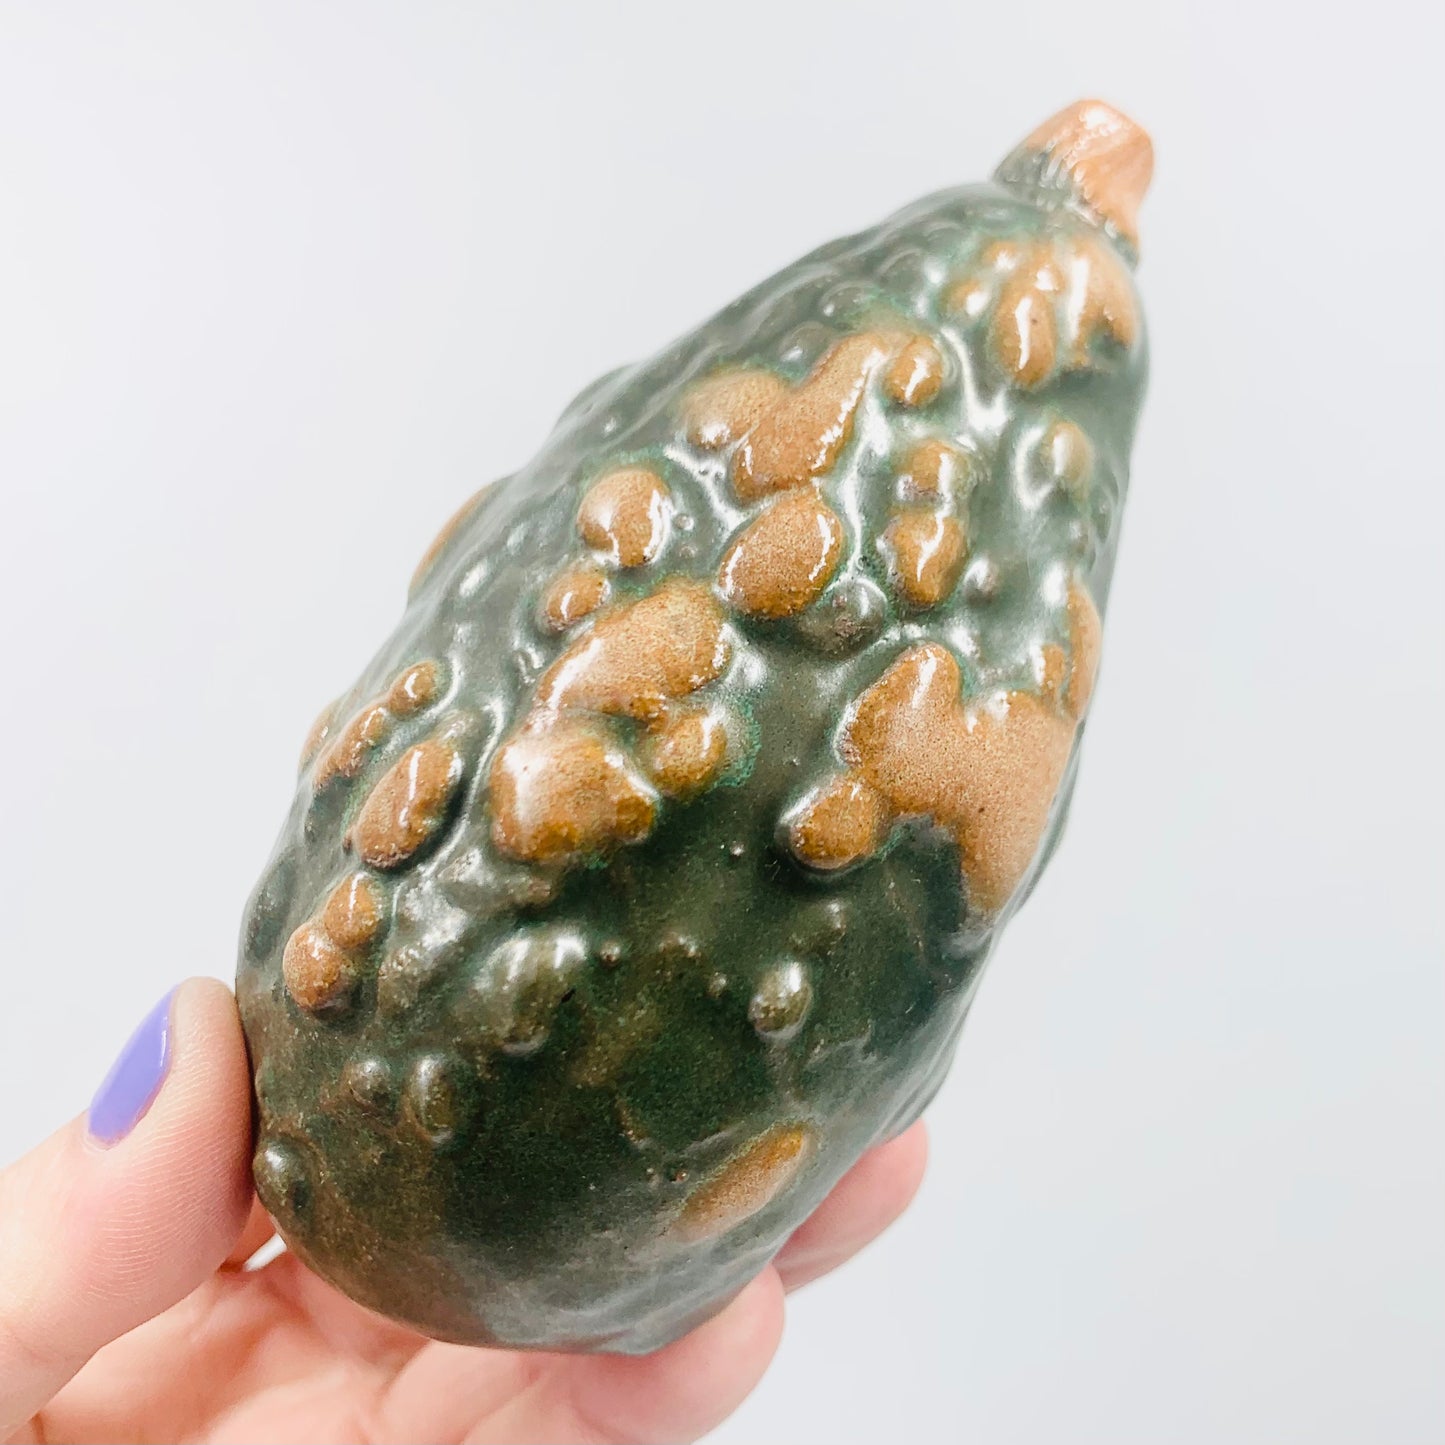 Extremely rare Midcentury hand made pottery Hubbard squash